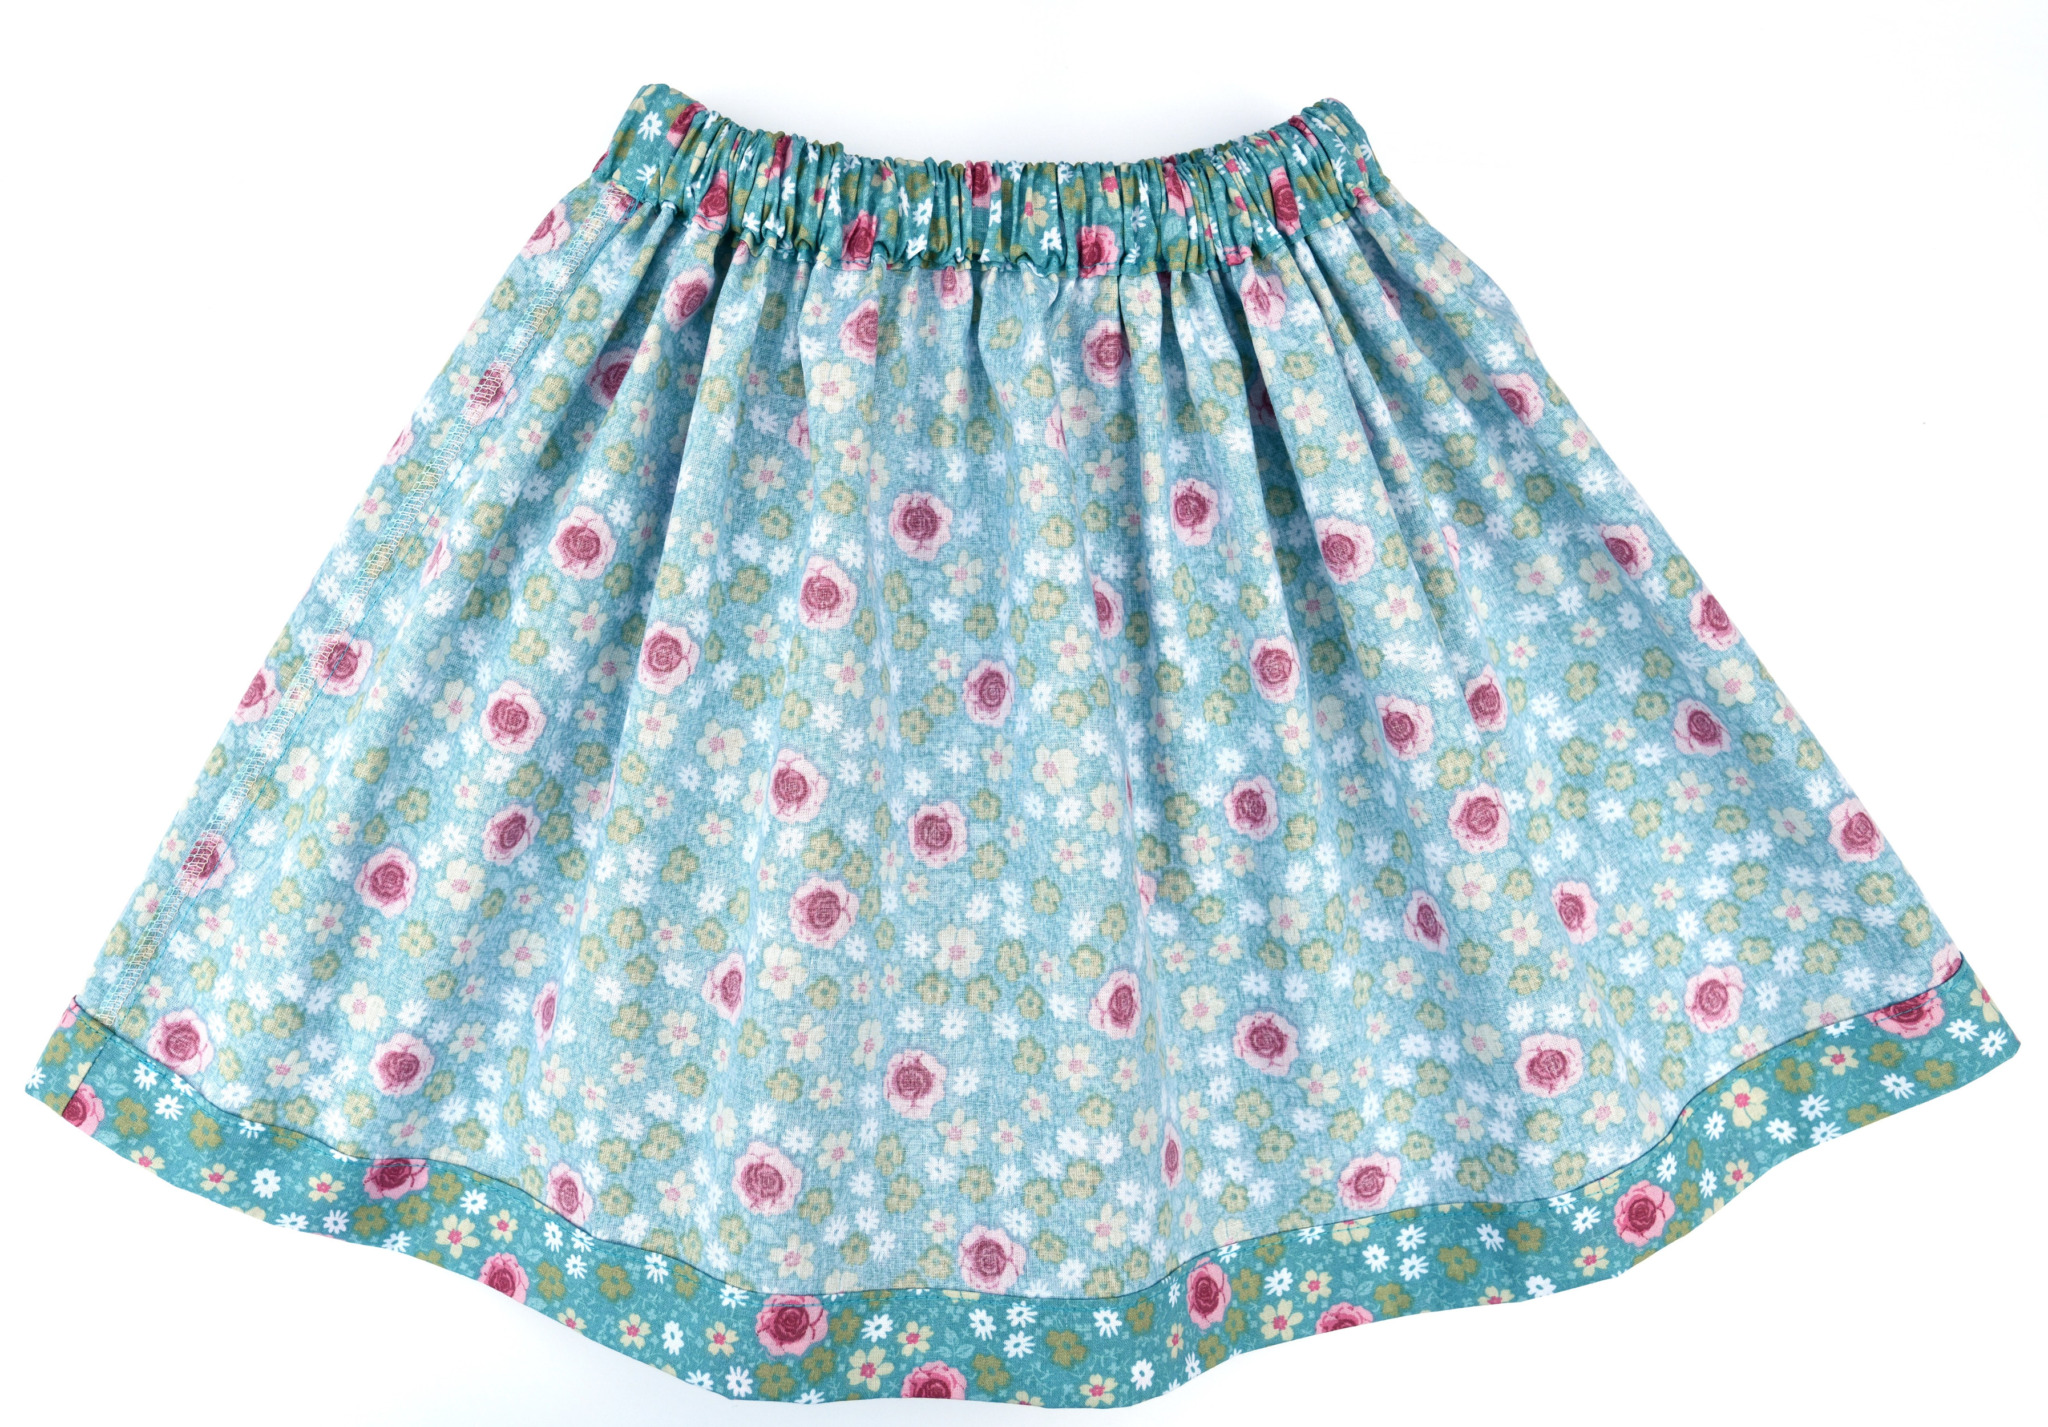 Cute floral skirt DIY with side bows and ties - I Can Sew This